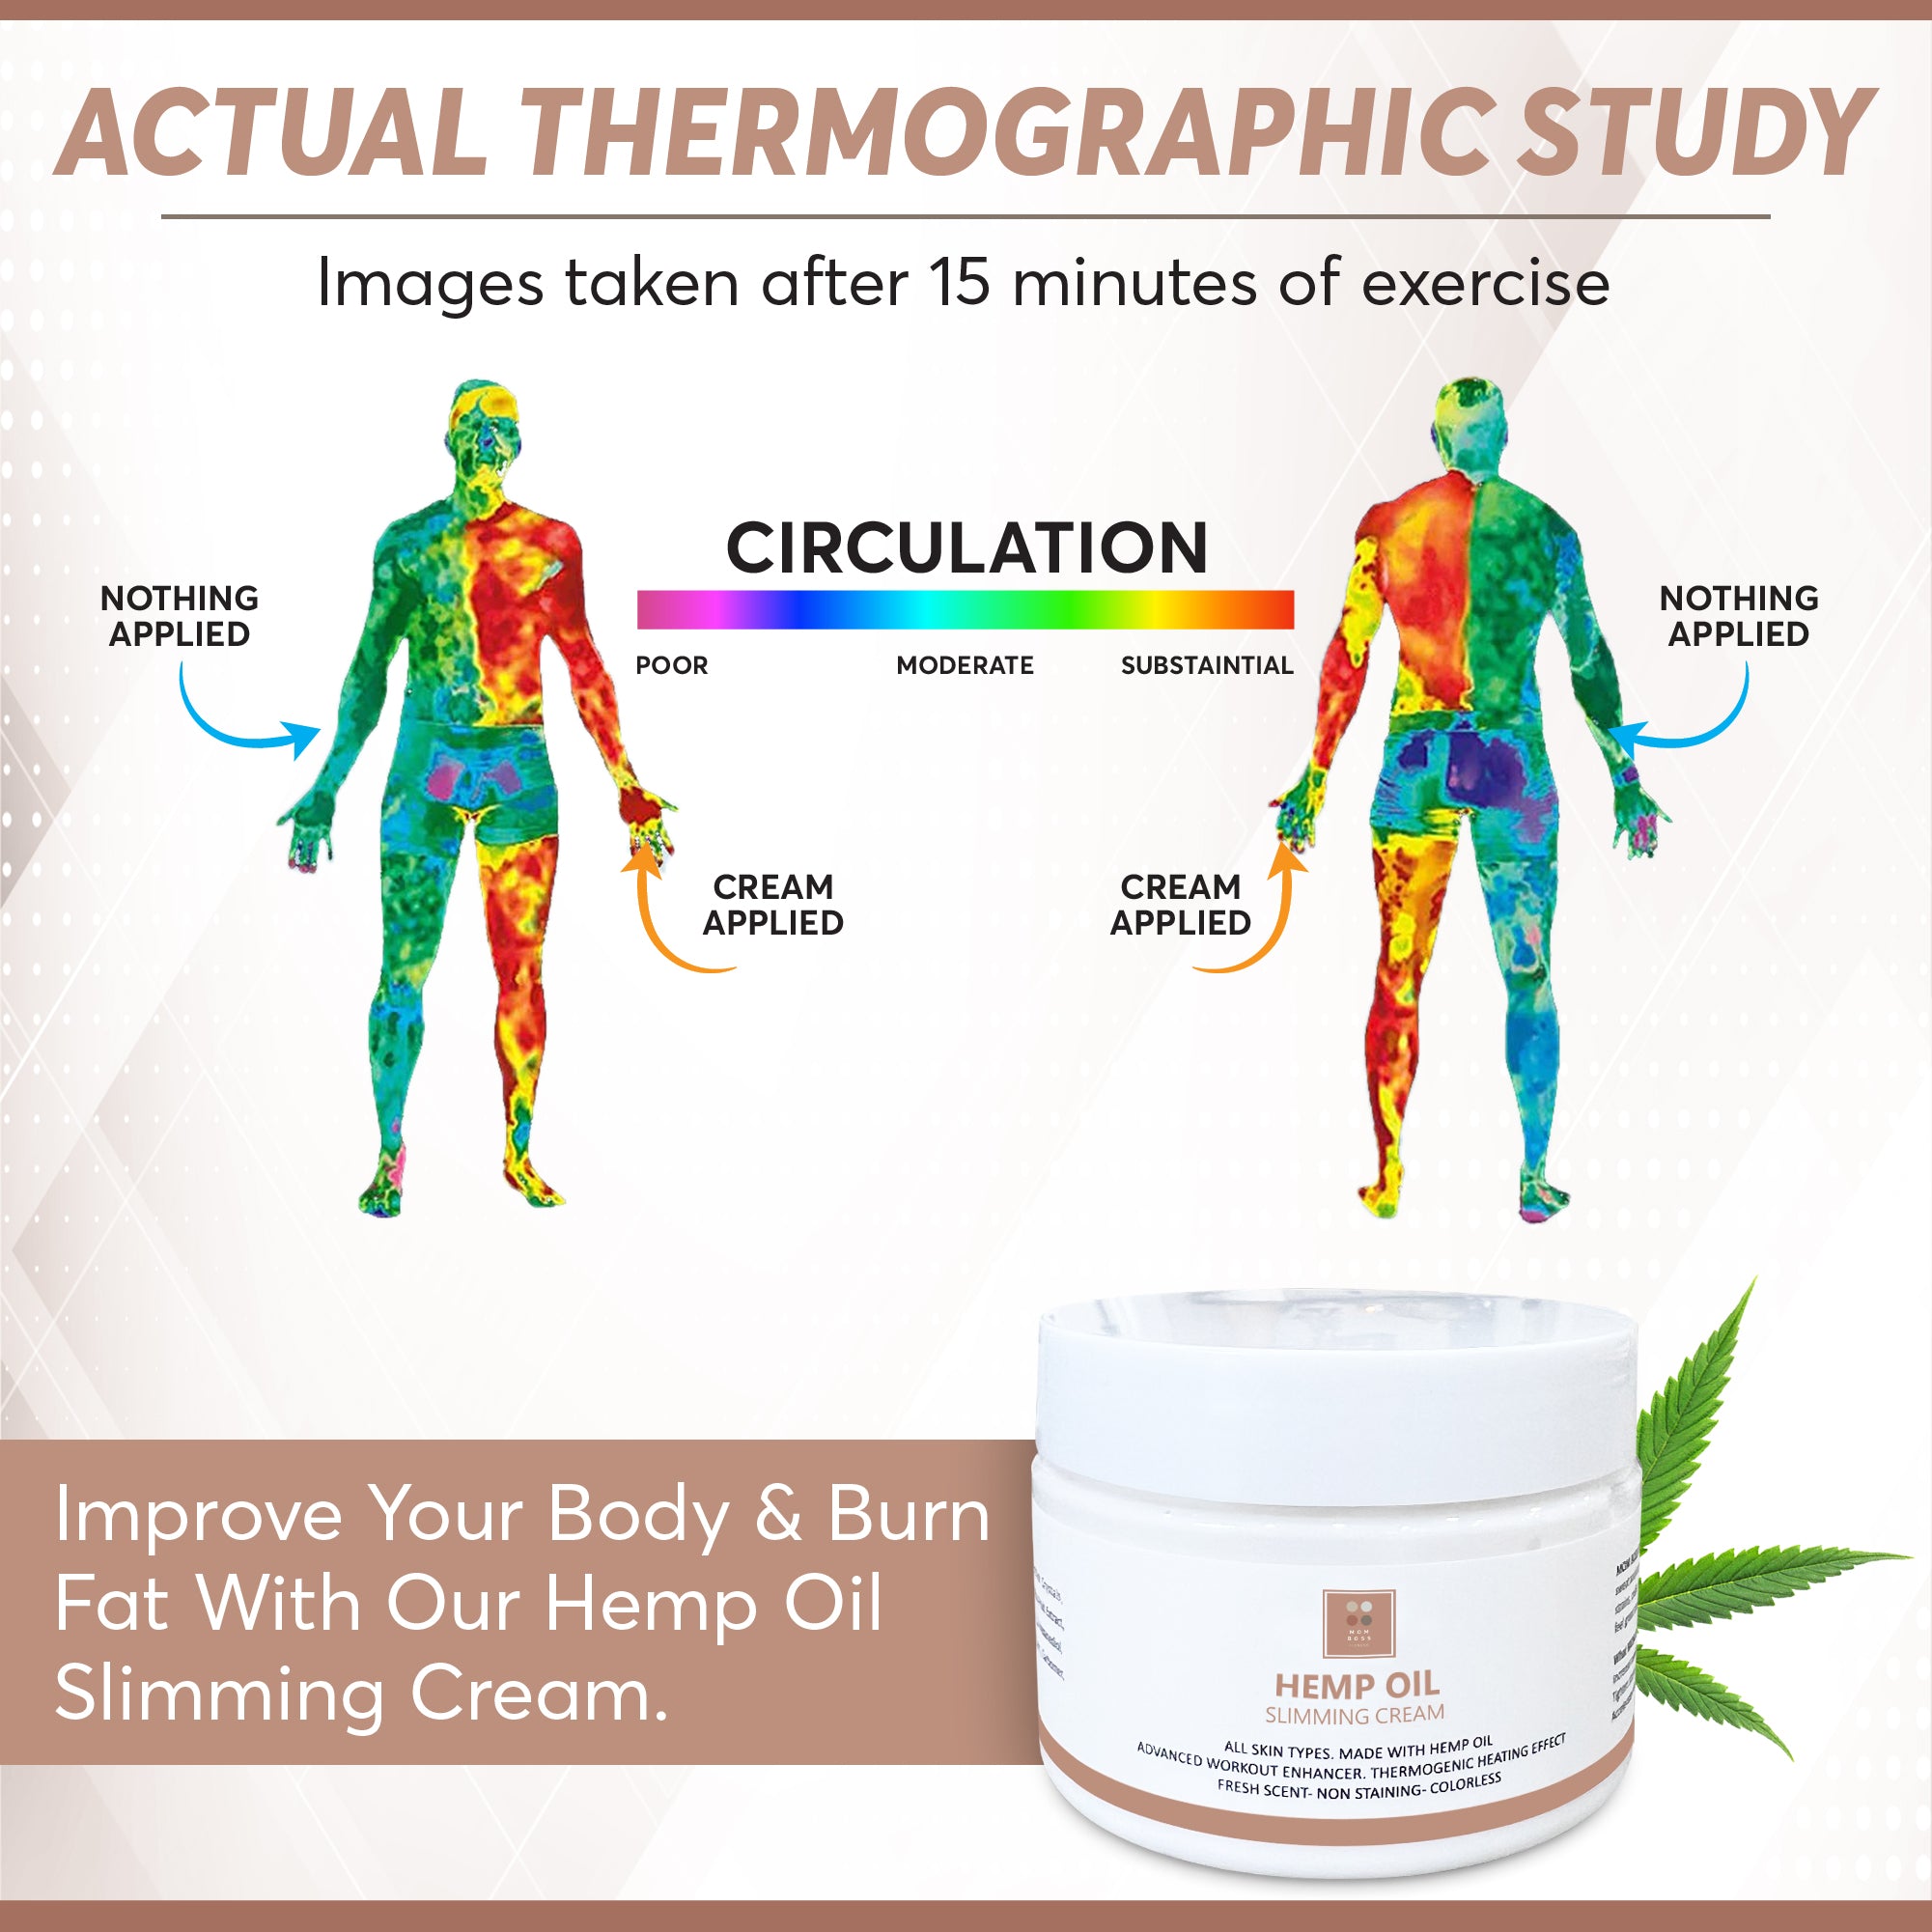 Hemp Oil Slimming Cream - Non Staining Weight Loss Cellulite Cream - Workout Enhancer Skin Tightening Cream with Thermogenic Heating Effect - Fat Burning Cream for Belly, Waist, Stomach & Buttocks